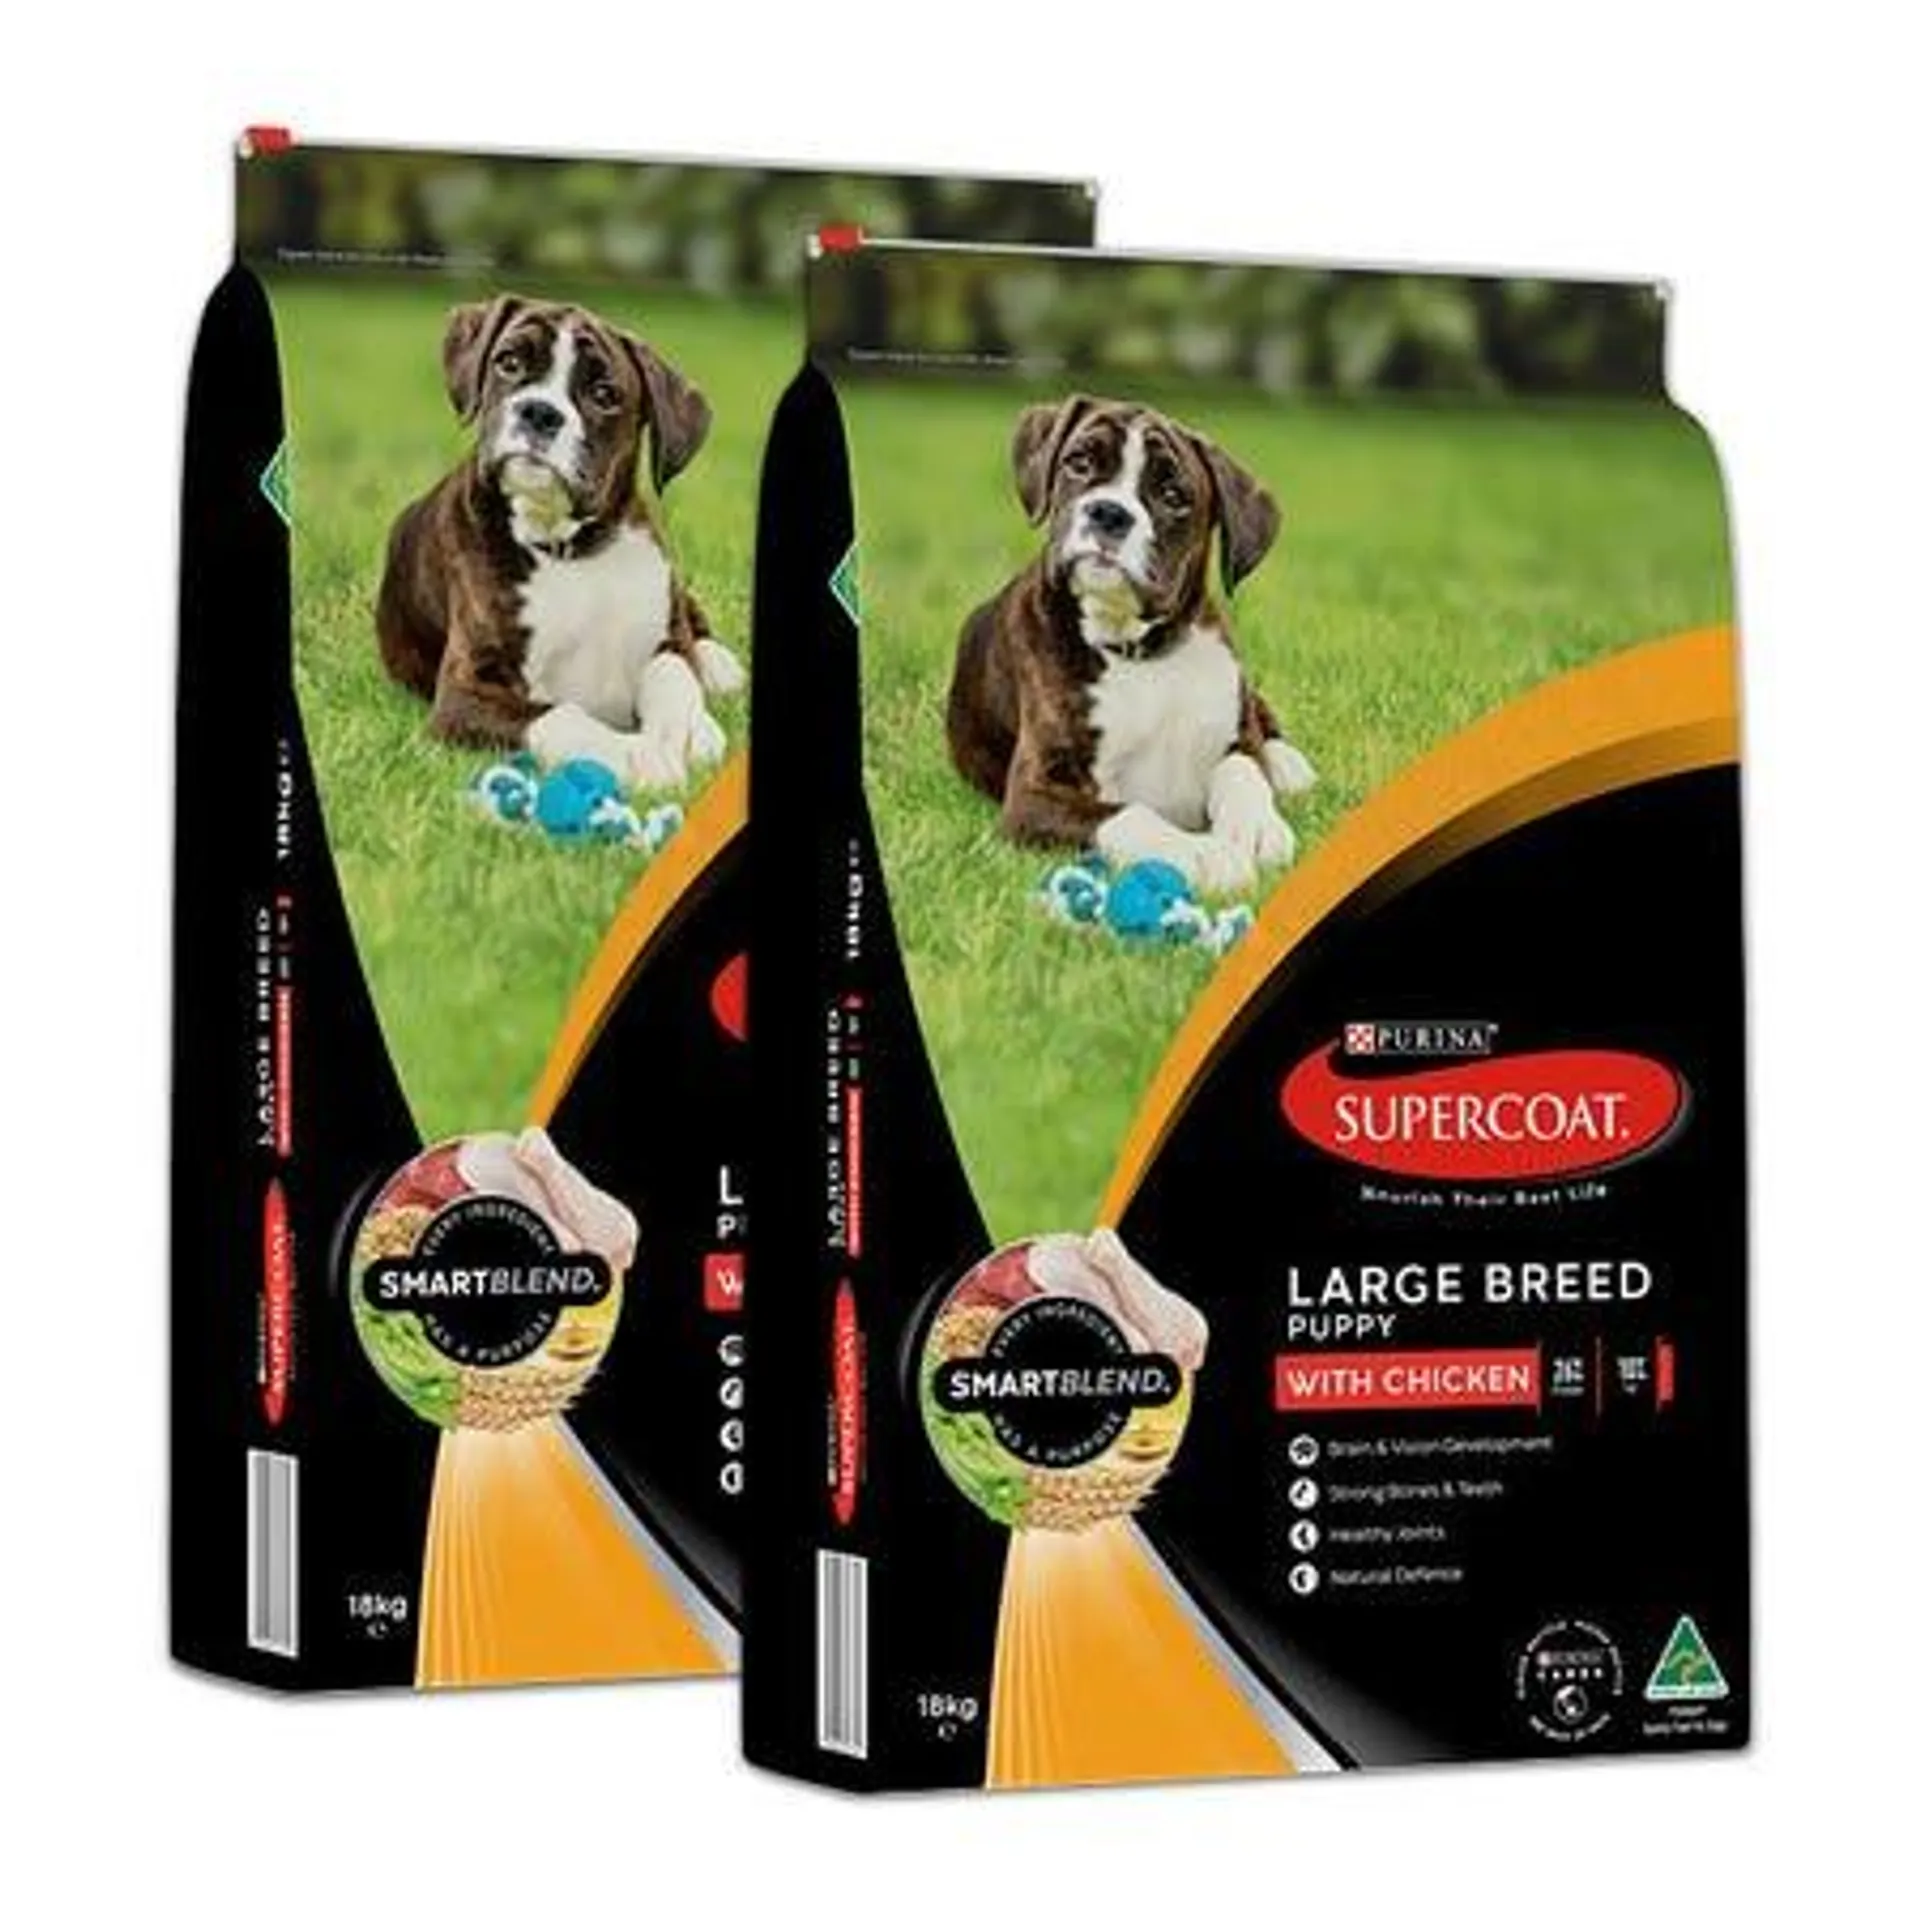 Supercoat Smartblend Chicken Large Breed Puppy Food 18kgx2